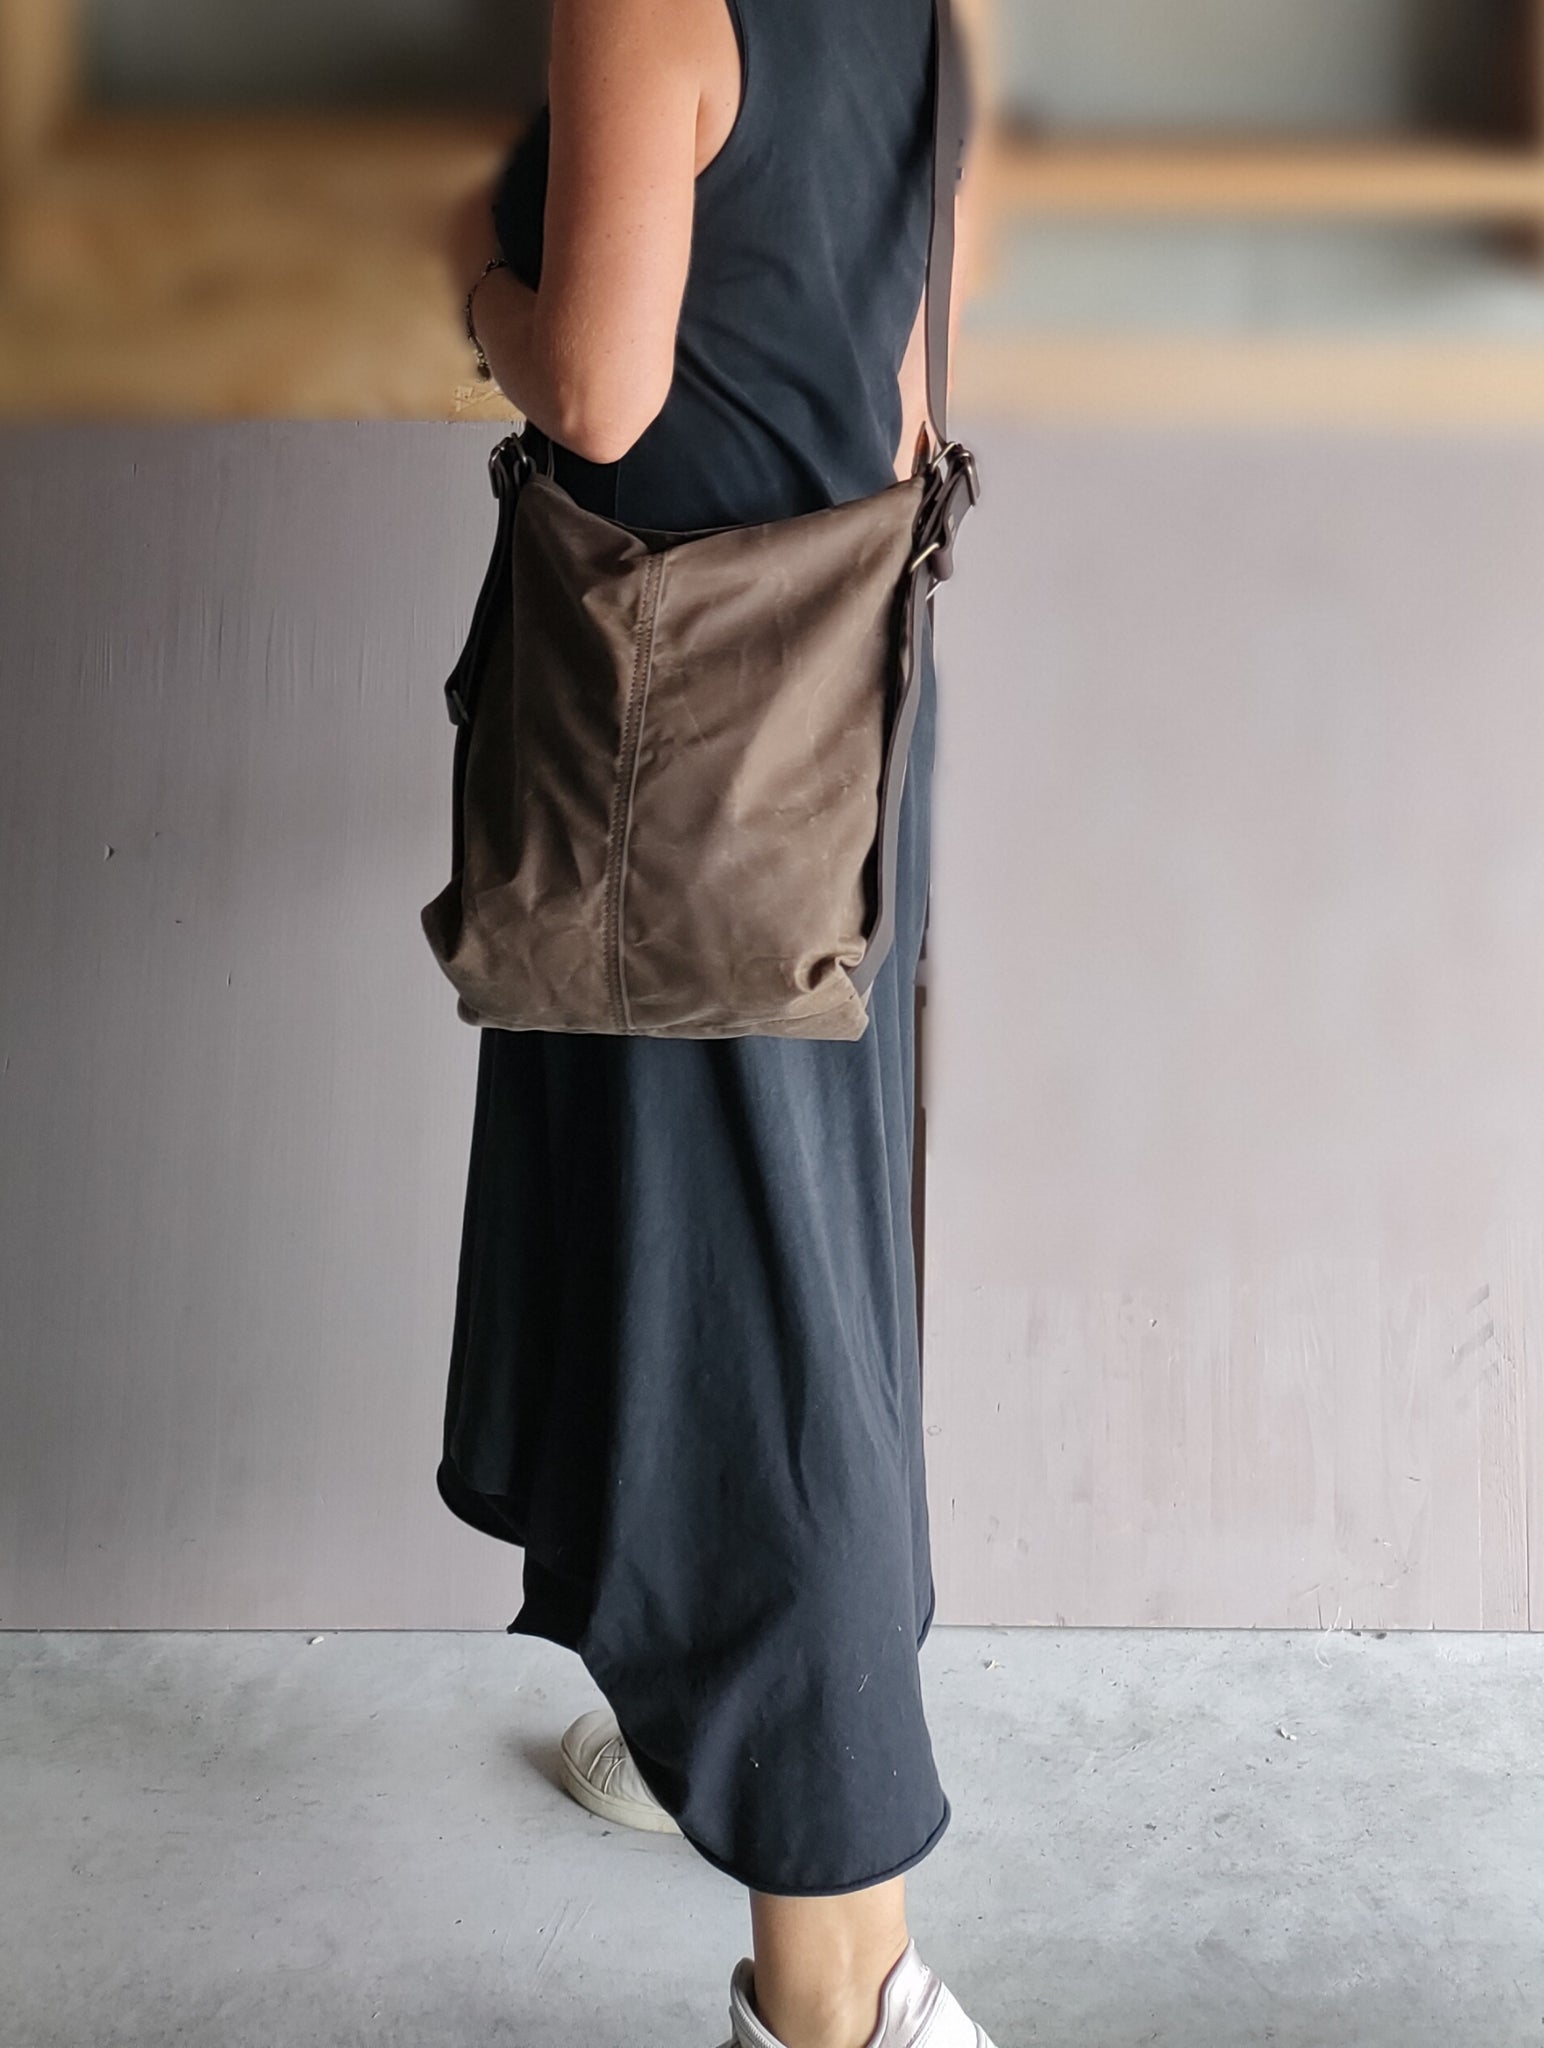 Backpack Purse, Carry-on Backpack, Laptop Backpack, Convertible Tote Bag  GREENPOINT Vegan Bag - Etsy